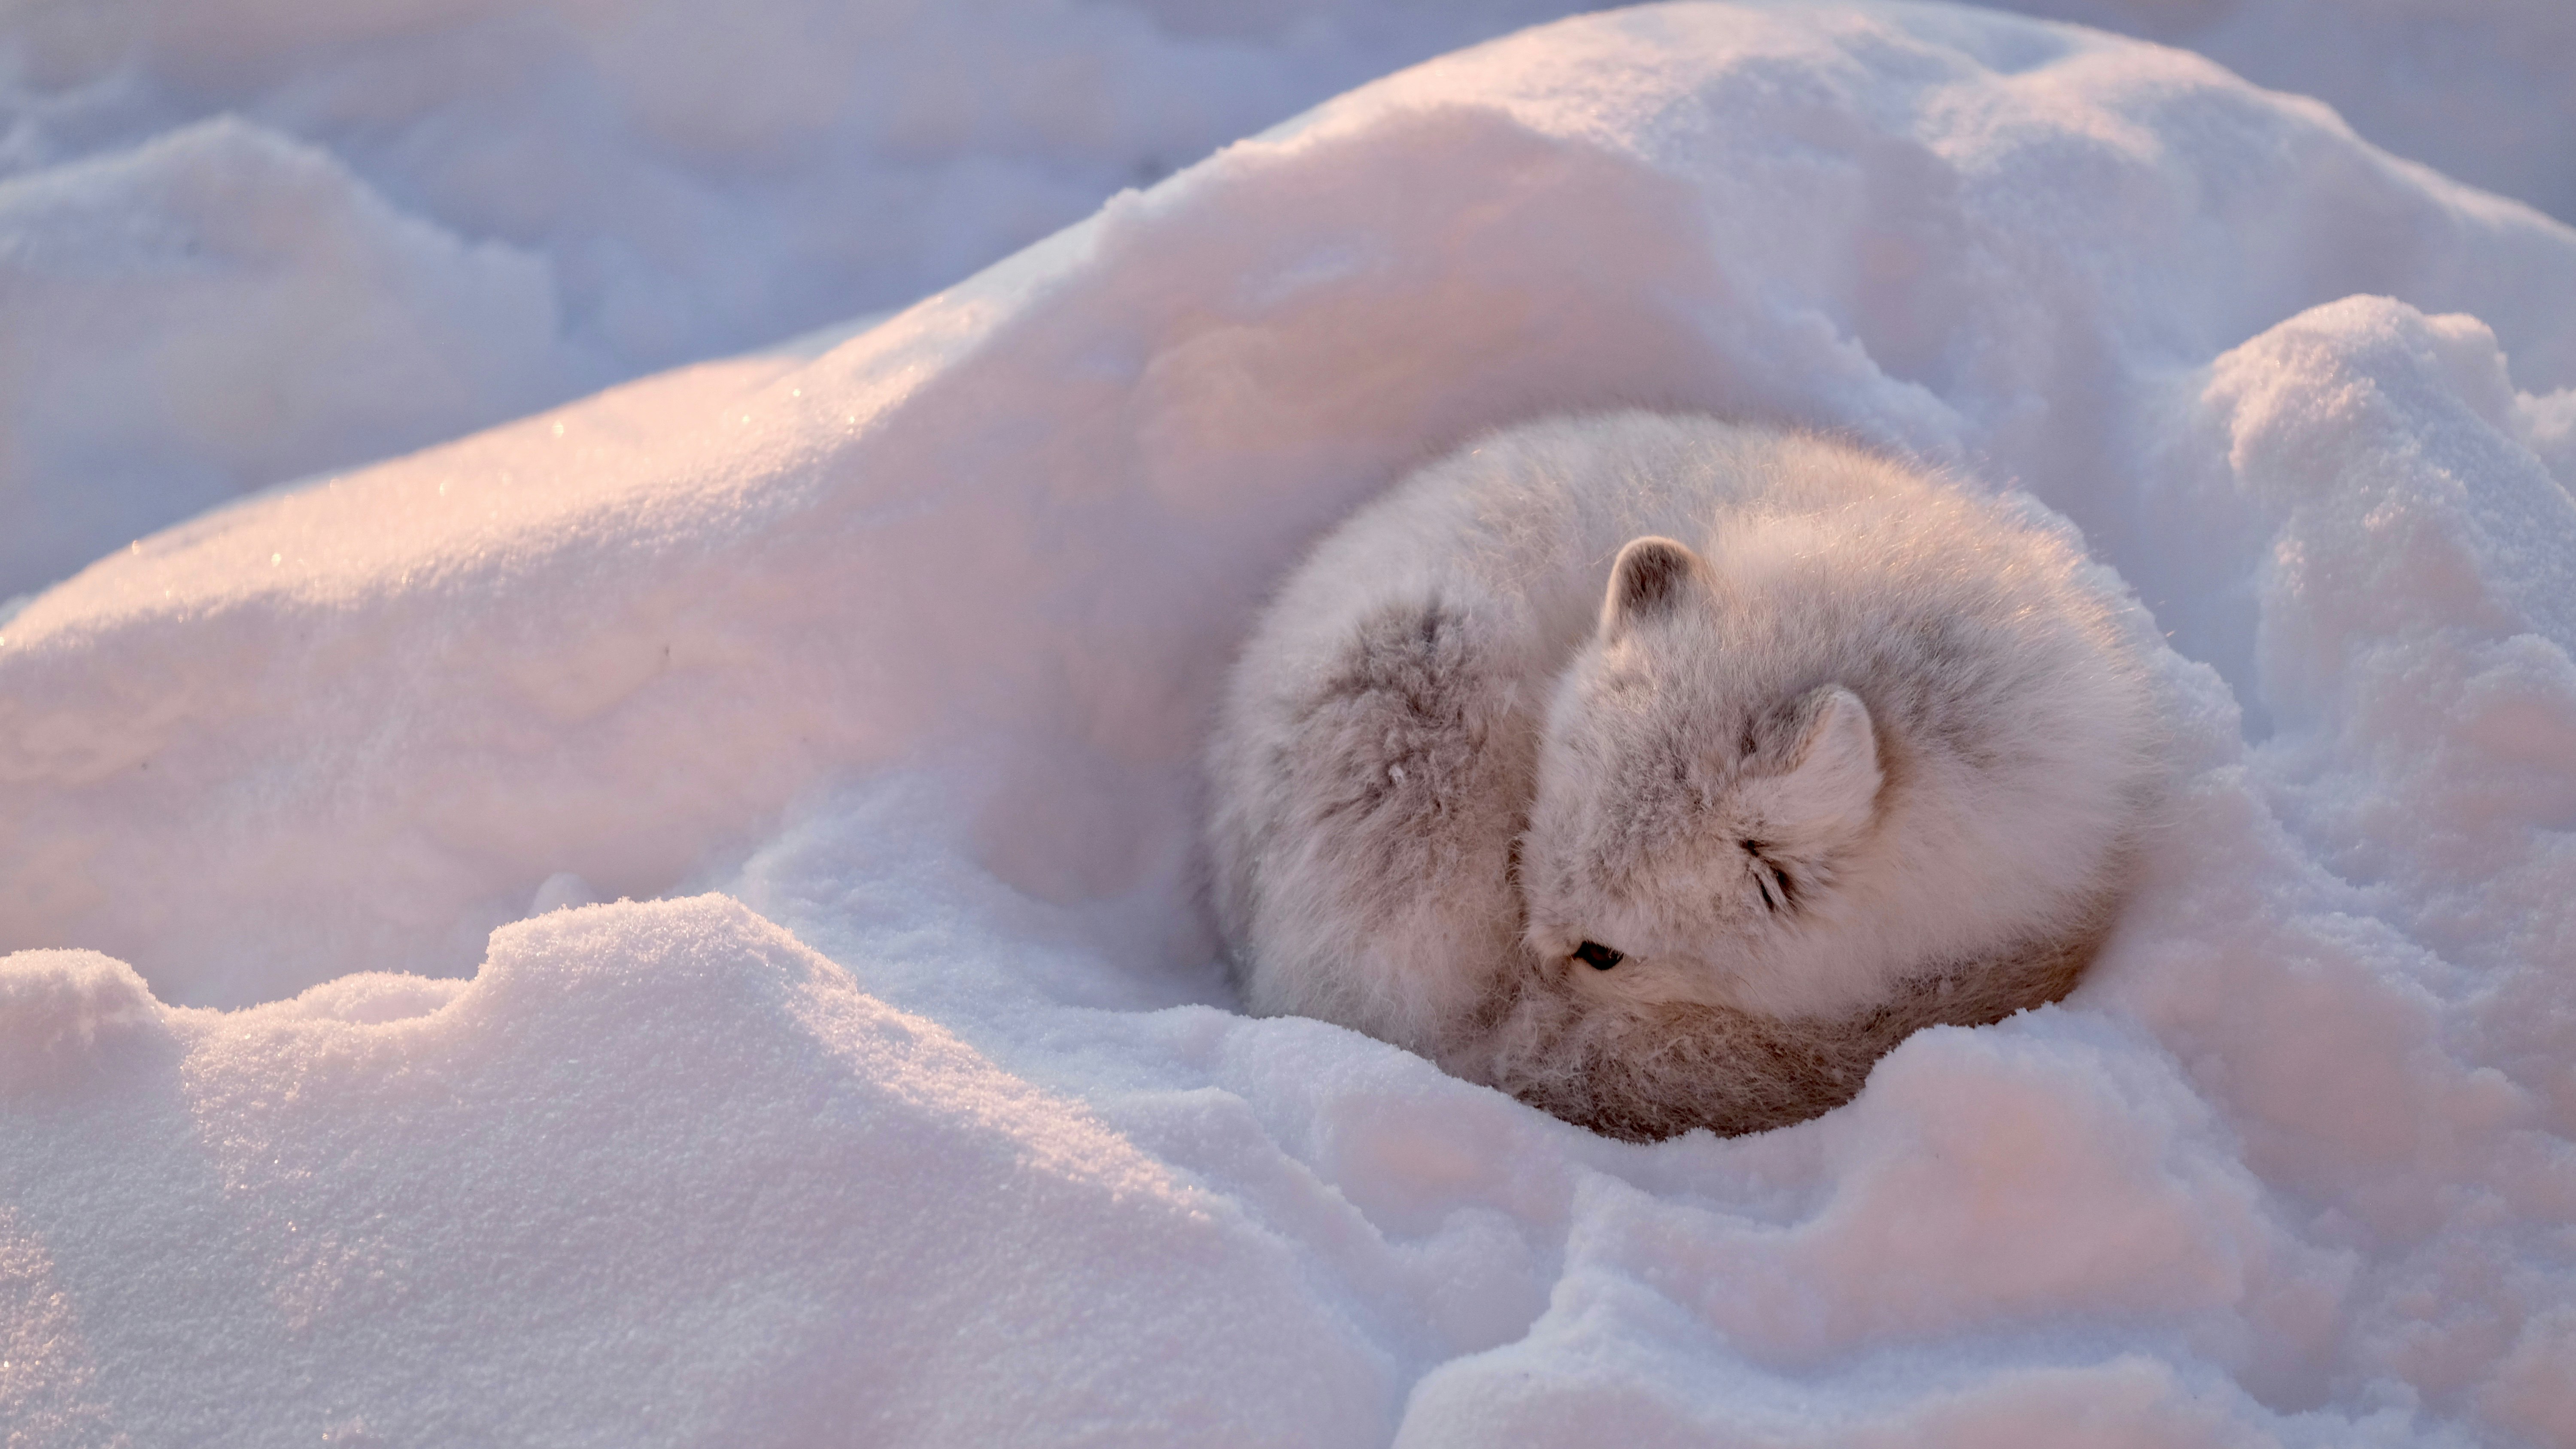 A fluffy white Arctic fox is curled up in a ball in a snow bank, one beady black eye visible as it wakes up